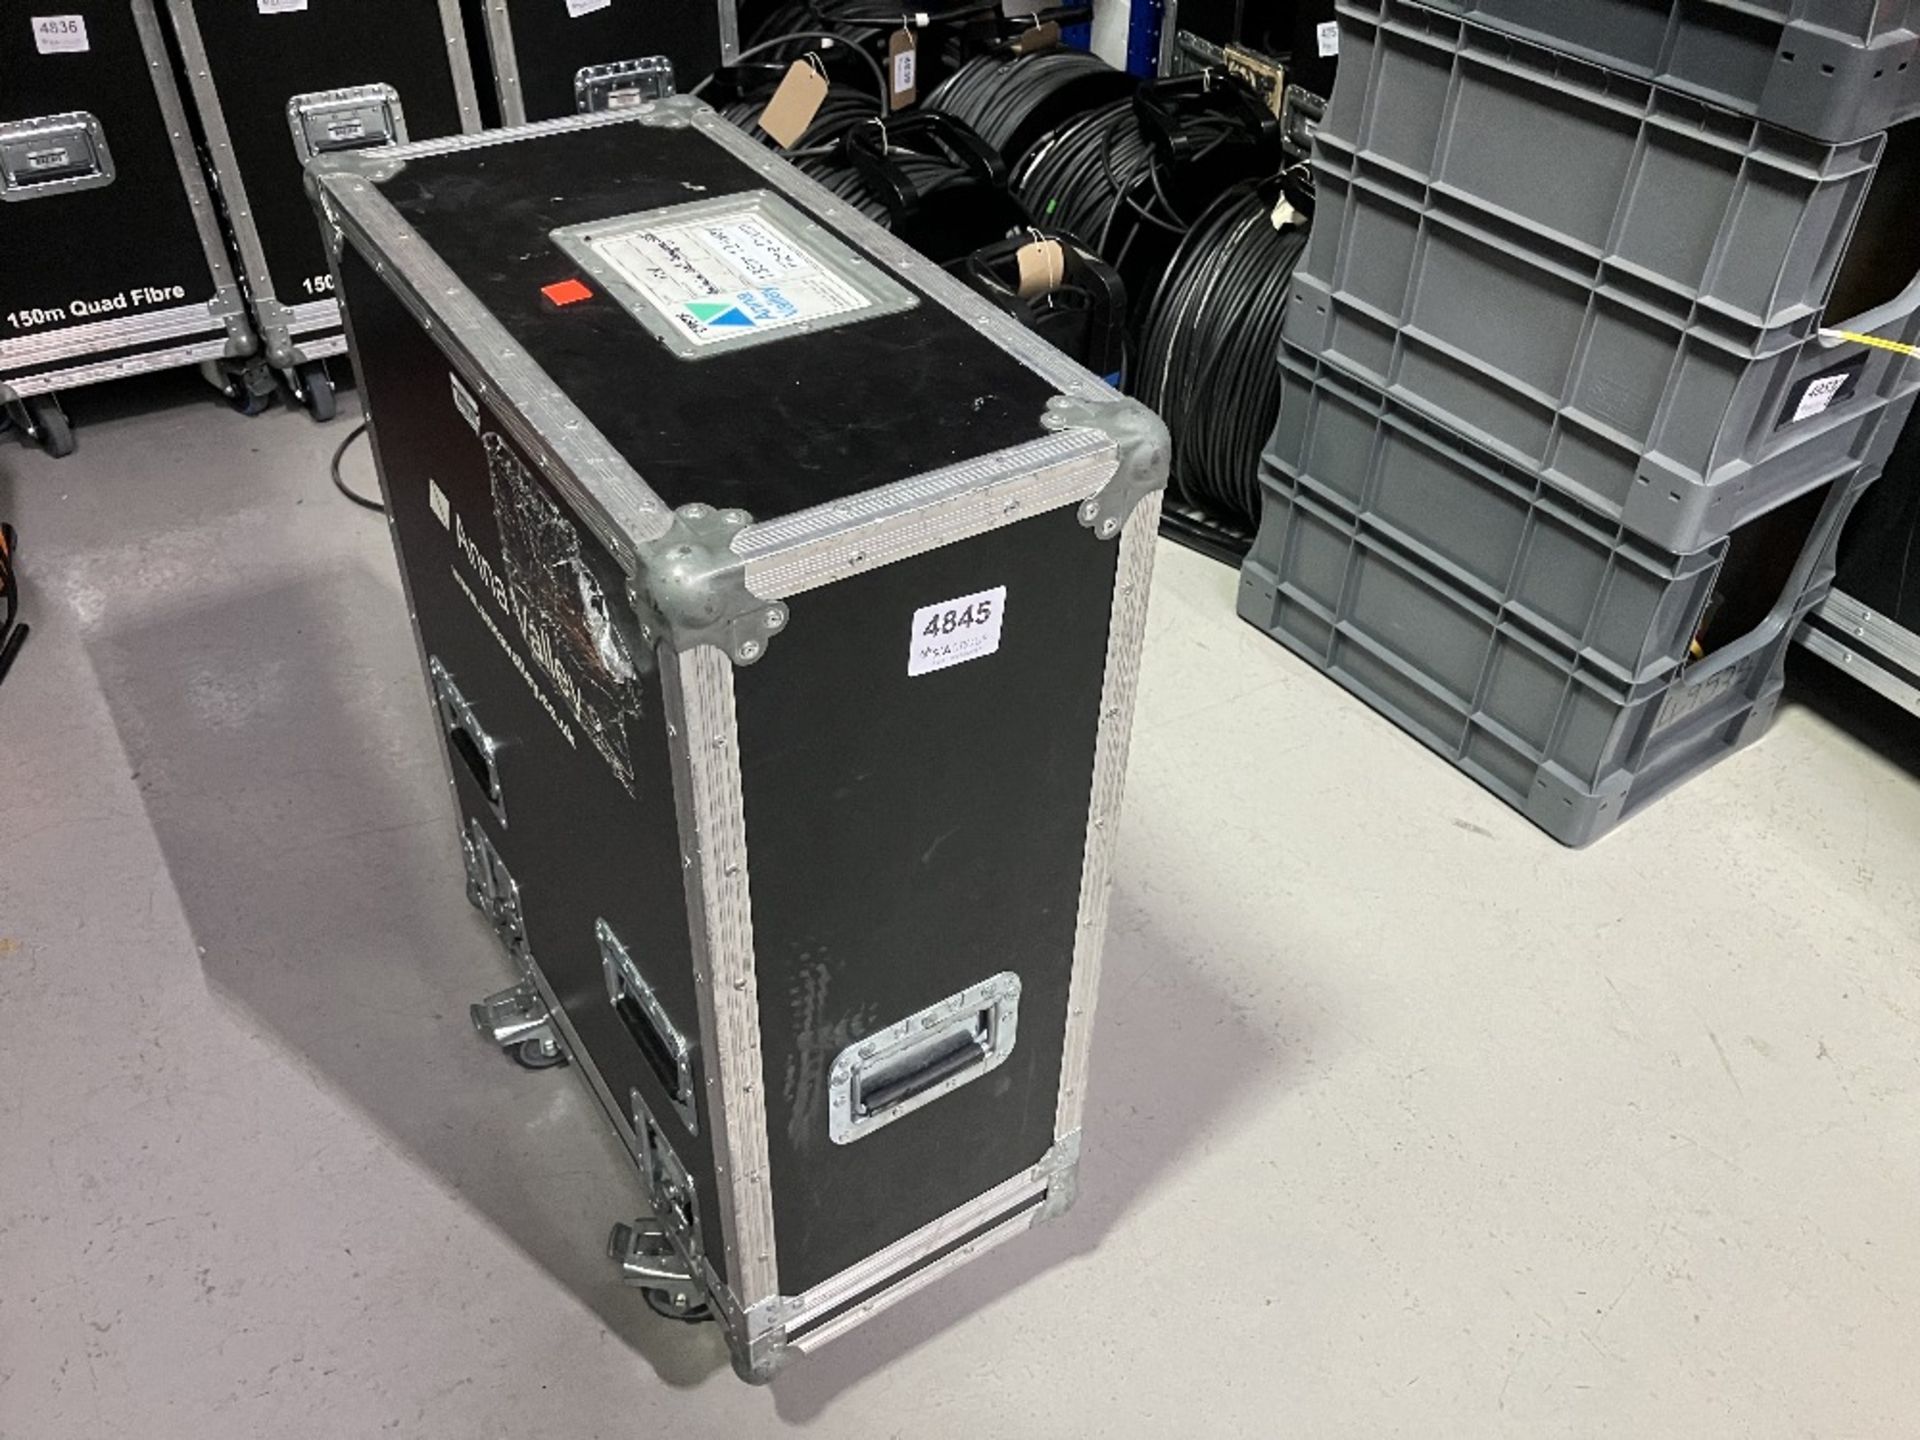 135m 12-Way Fibre Cable Reel With Heavy Duty Mobile Flight case - Image 2 of 9